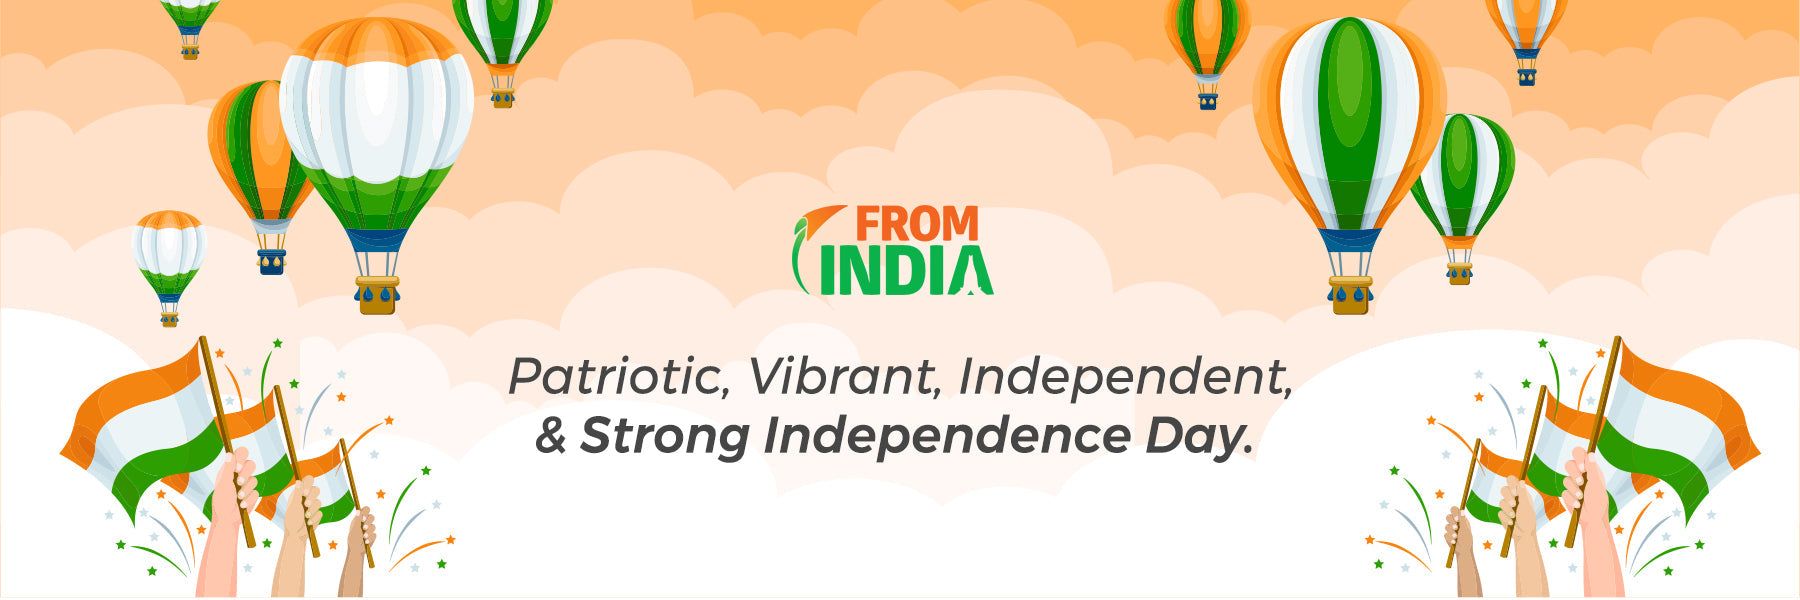 Patriotic, Vibrant, Independent & Strong Independence Day FromIndia.com